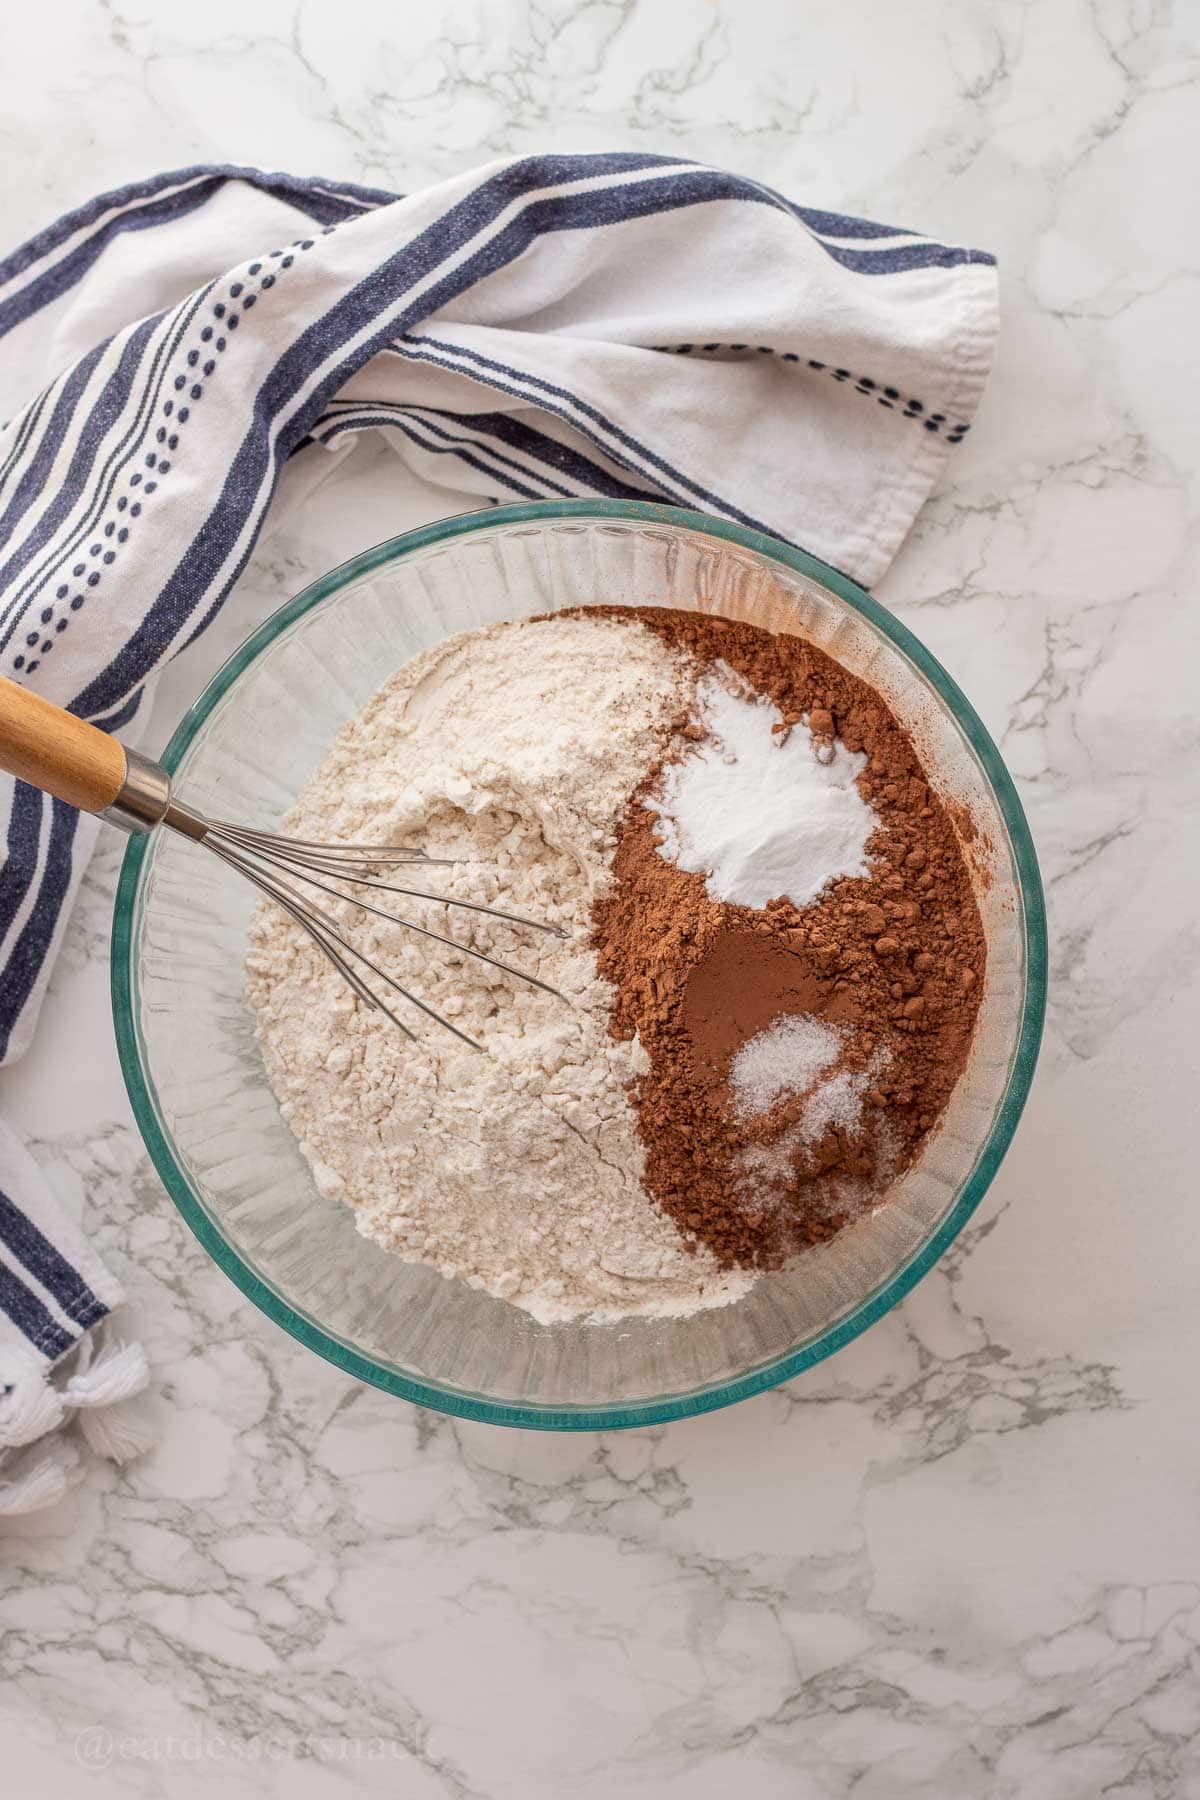 Flour, salt, baking soda, and cocoa powder in glass bowl with whisk.